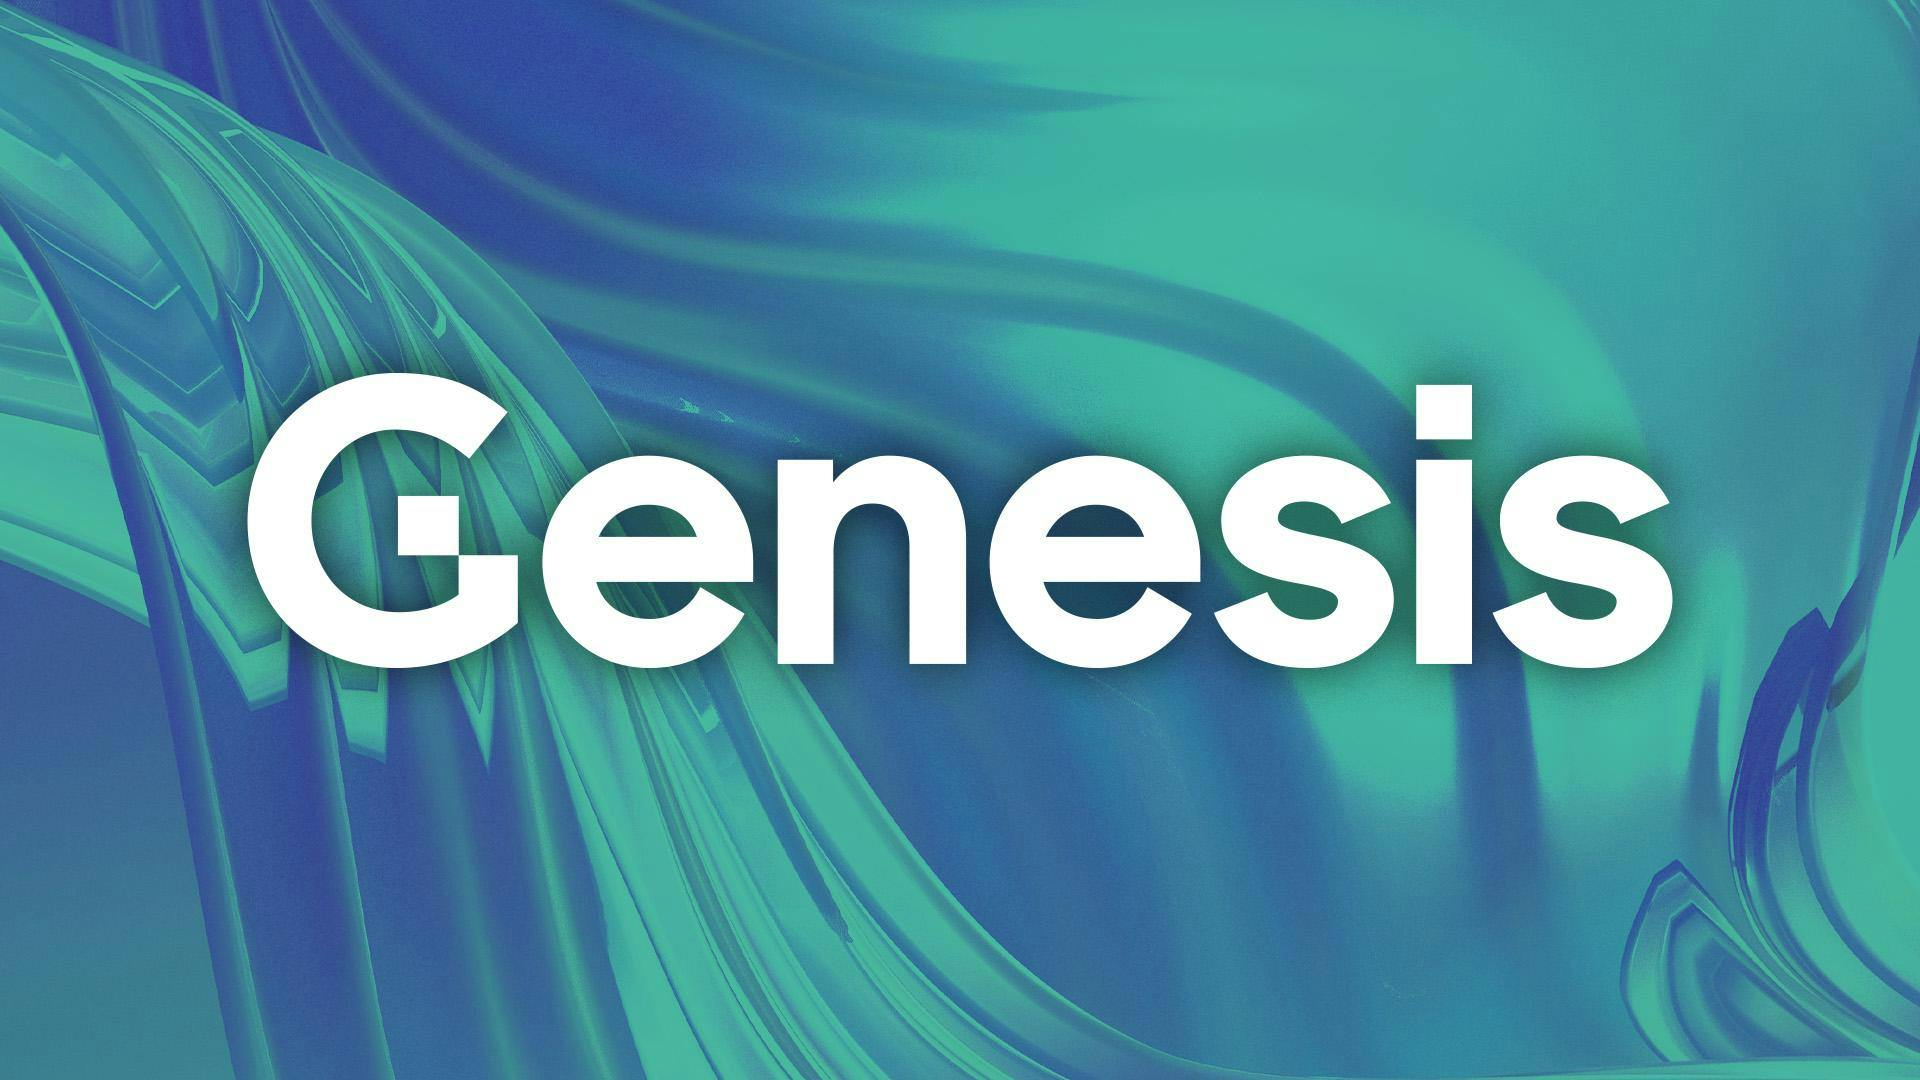 Genesis Wins Court Approval to Distribute $3 Billion to Creditors with 77% Recovery, DCG Receives No Recovery